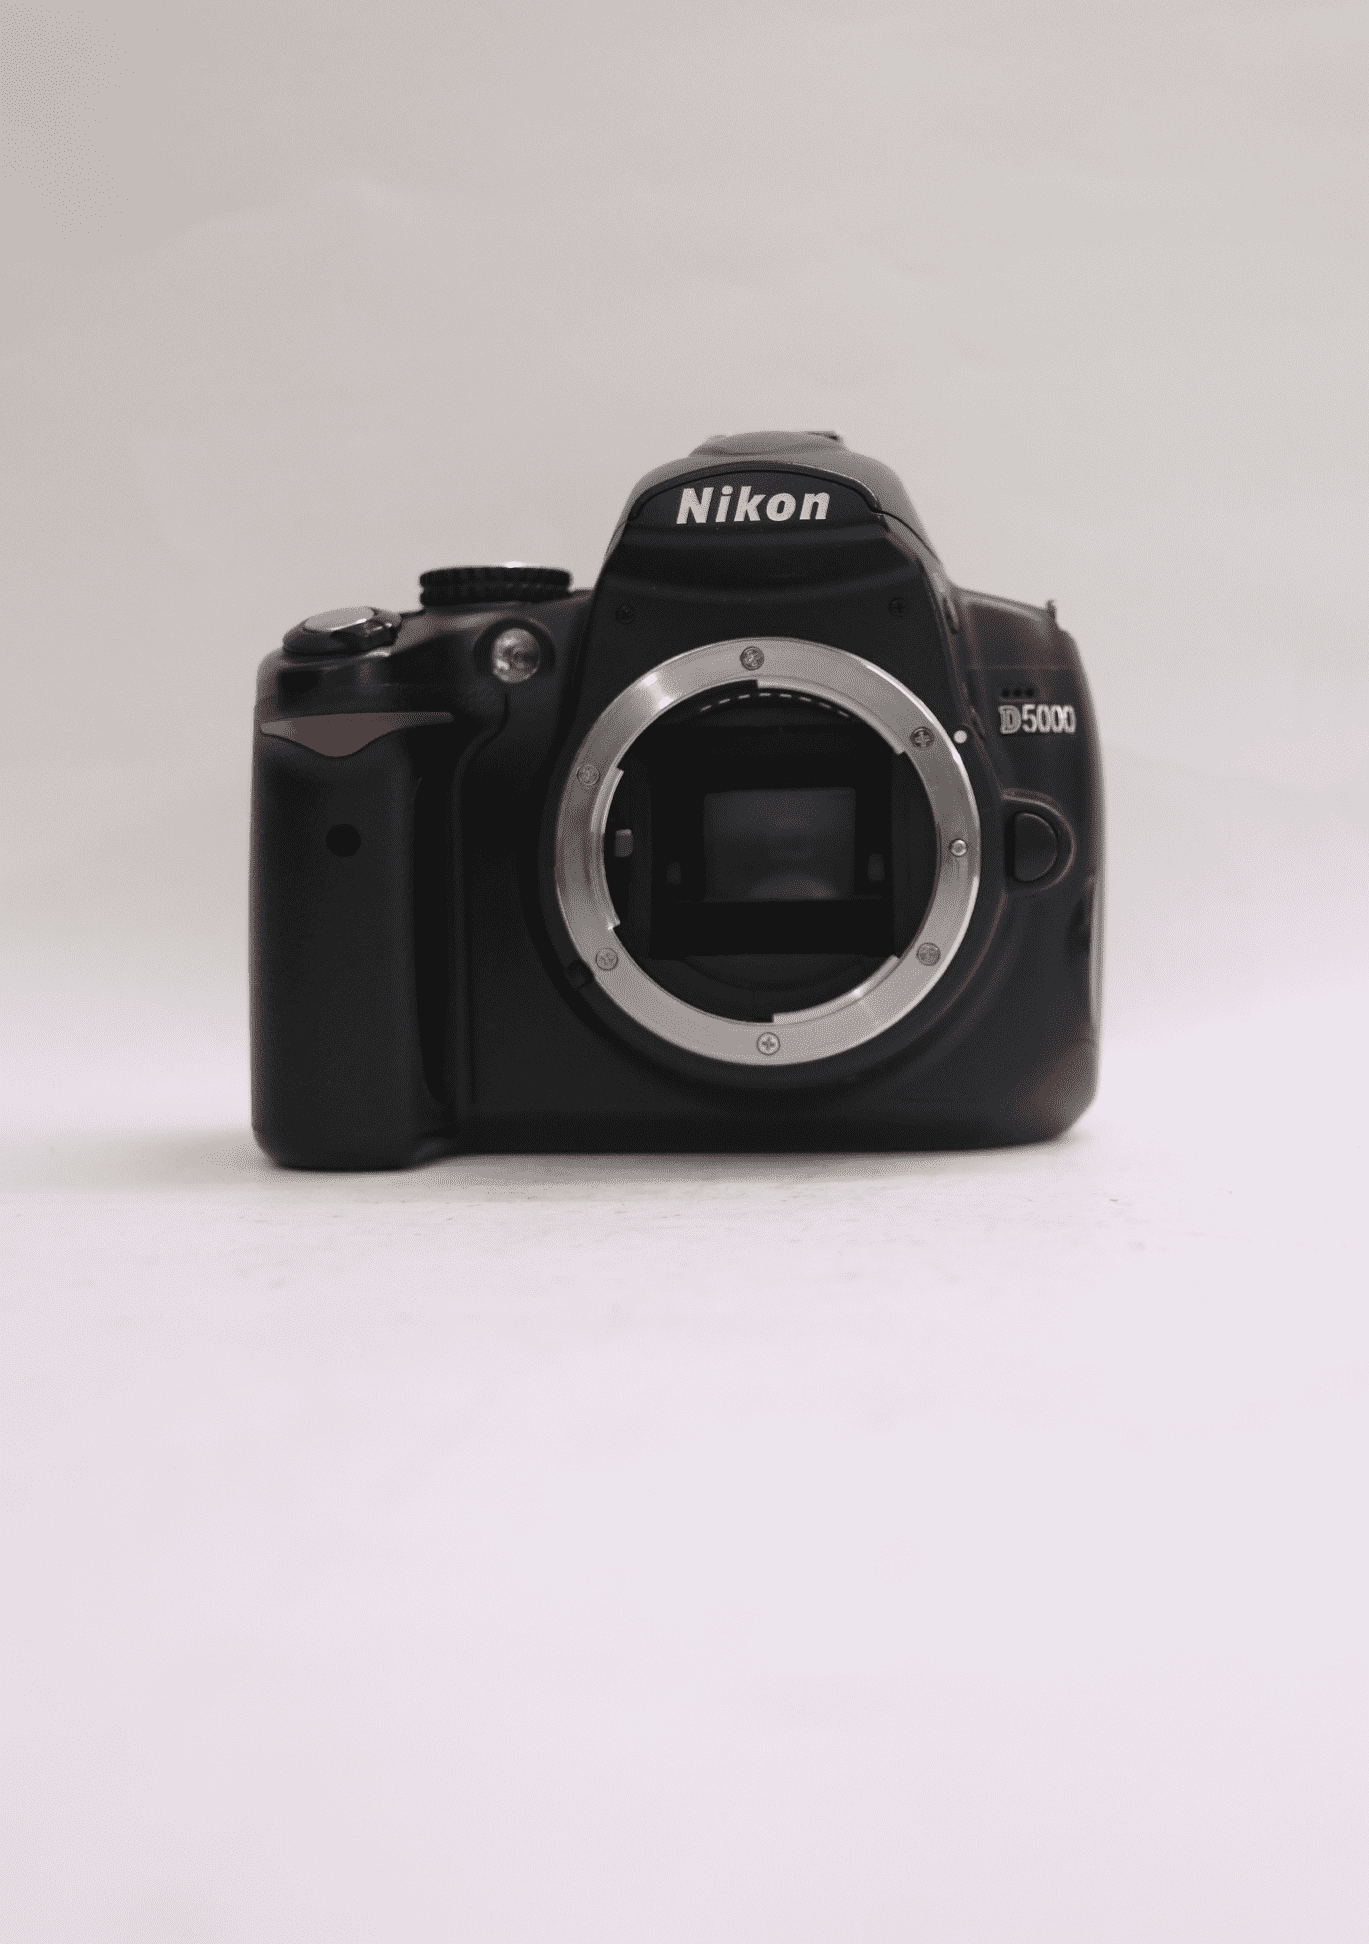 Used Nikon D5000 with 18-55mm Lens